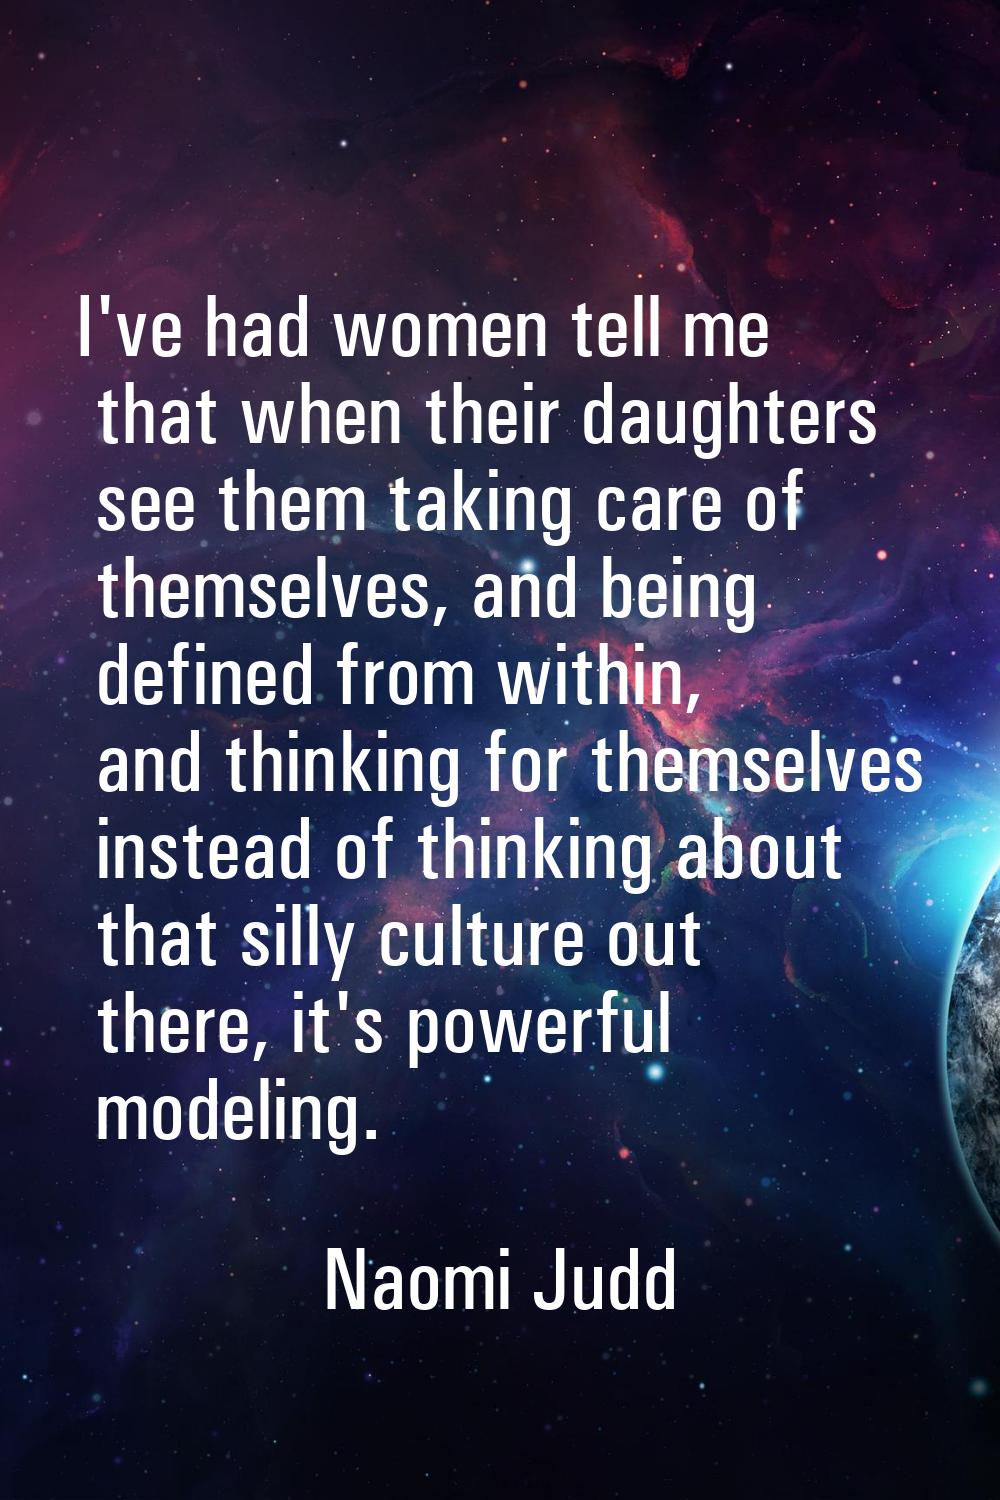 I've had women tell me that when their daughters see them taking care of themselves, and being defi